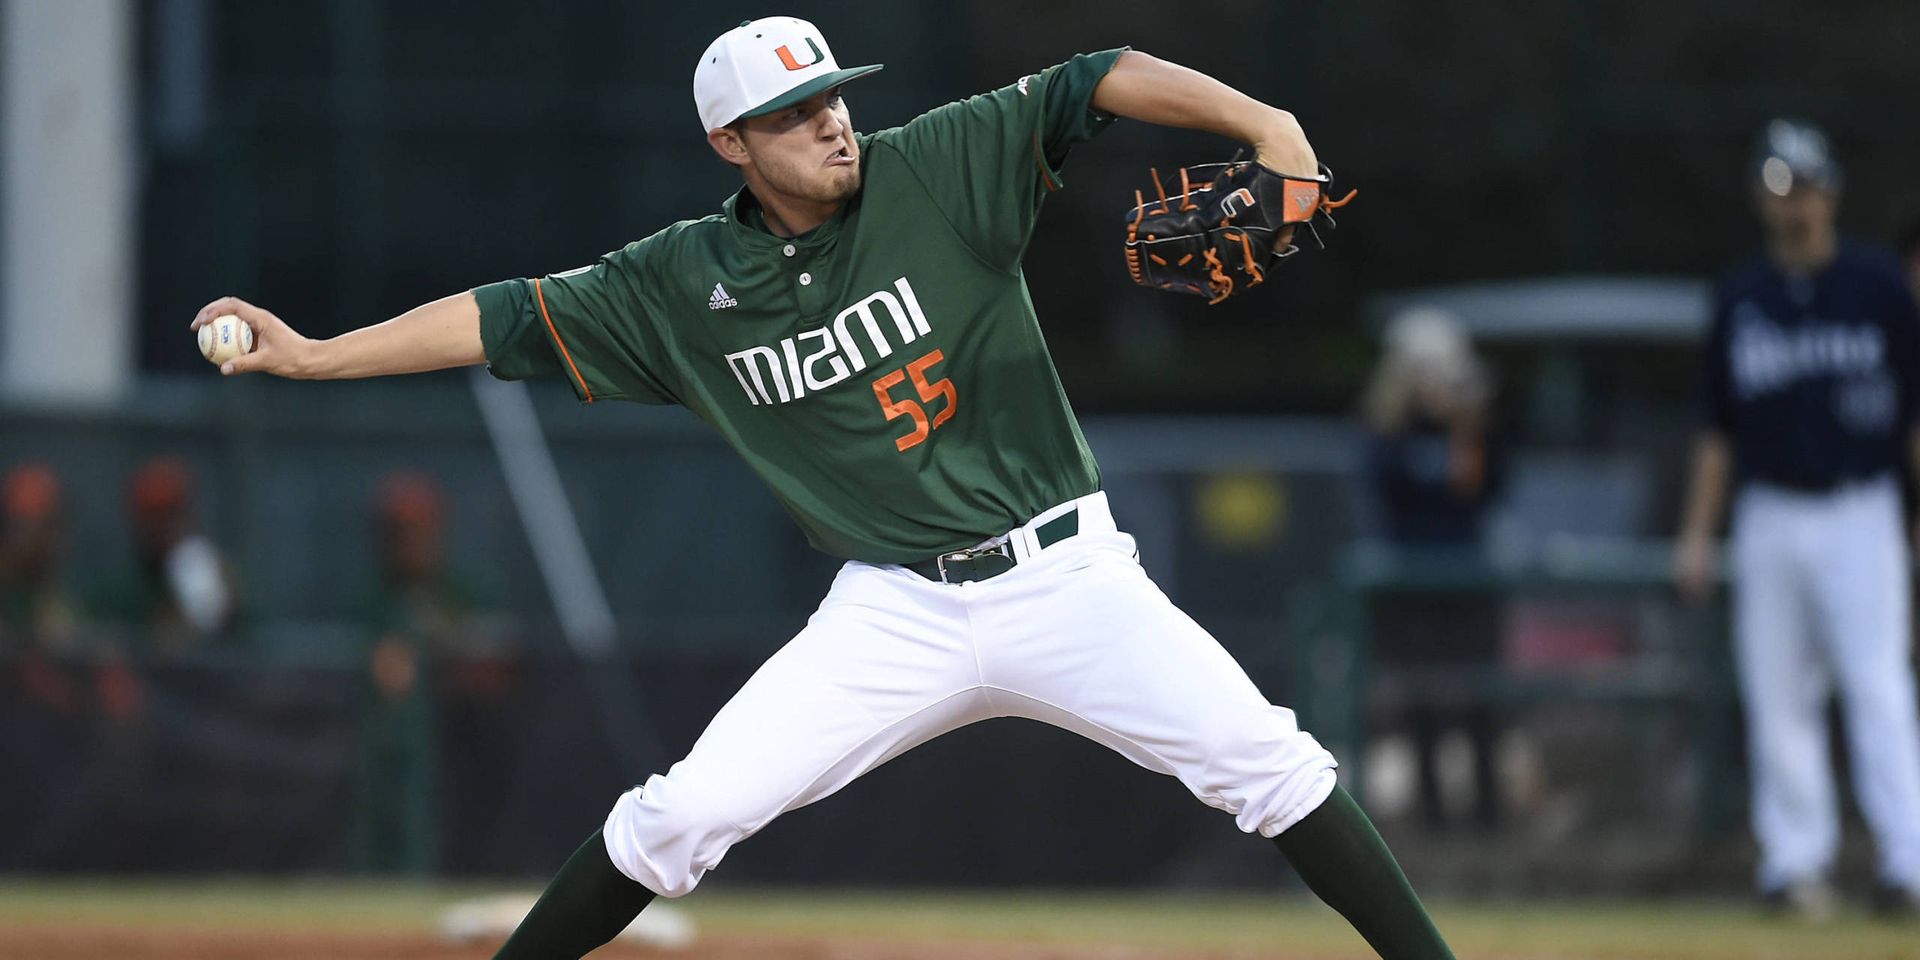 Baseball Falls to Bethune-Cookman in Game 2